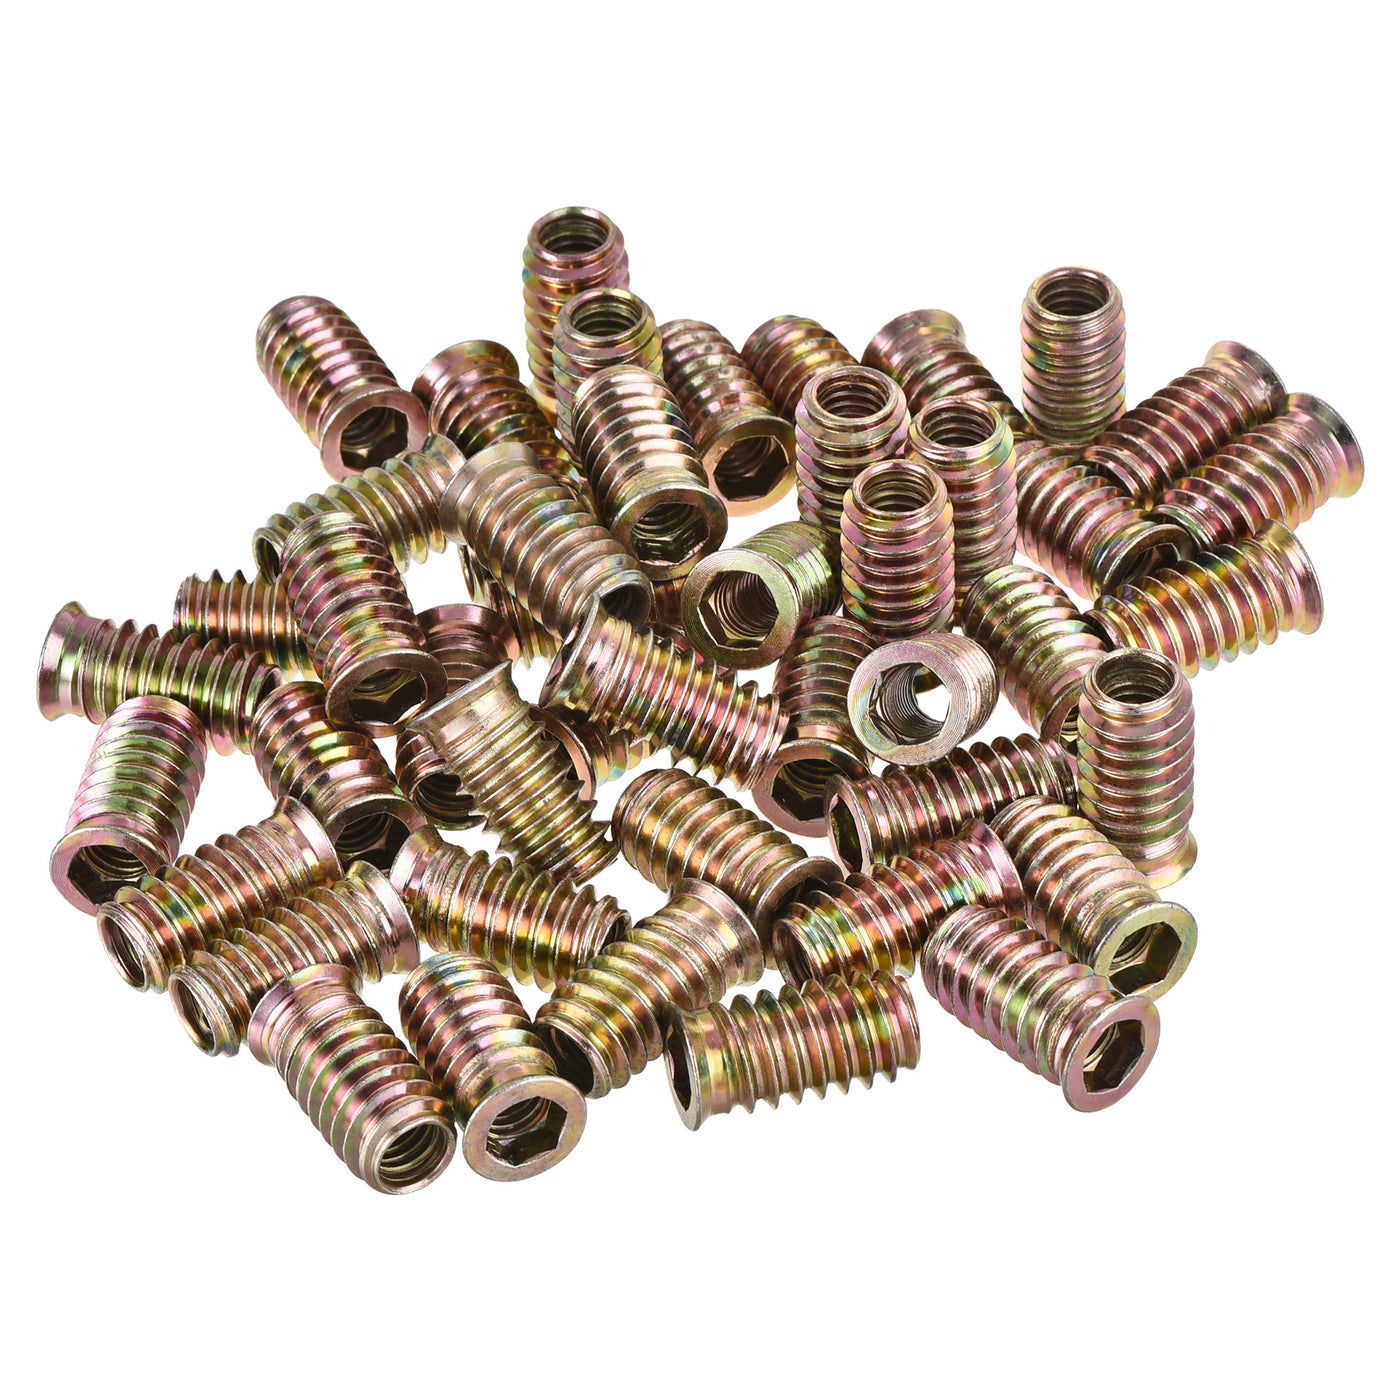 uxcell Uxcell 5/16"-18x25mm Threaded Insert Nuts Hex Socket Drive for Wood Furniture, with Wrench 50pcs